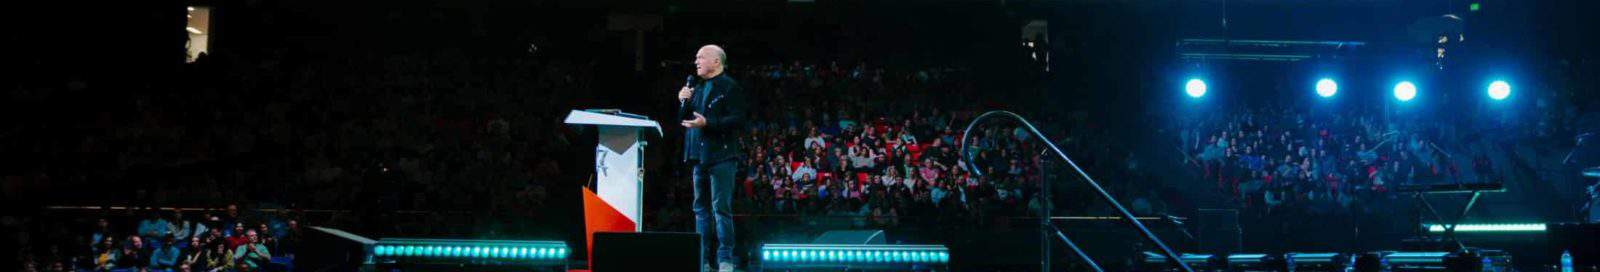 greglaurie-stage-boise-crusade